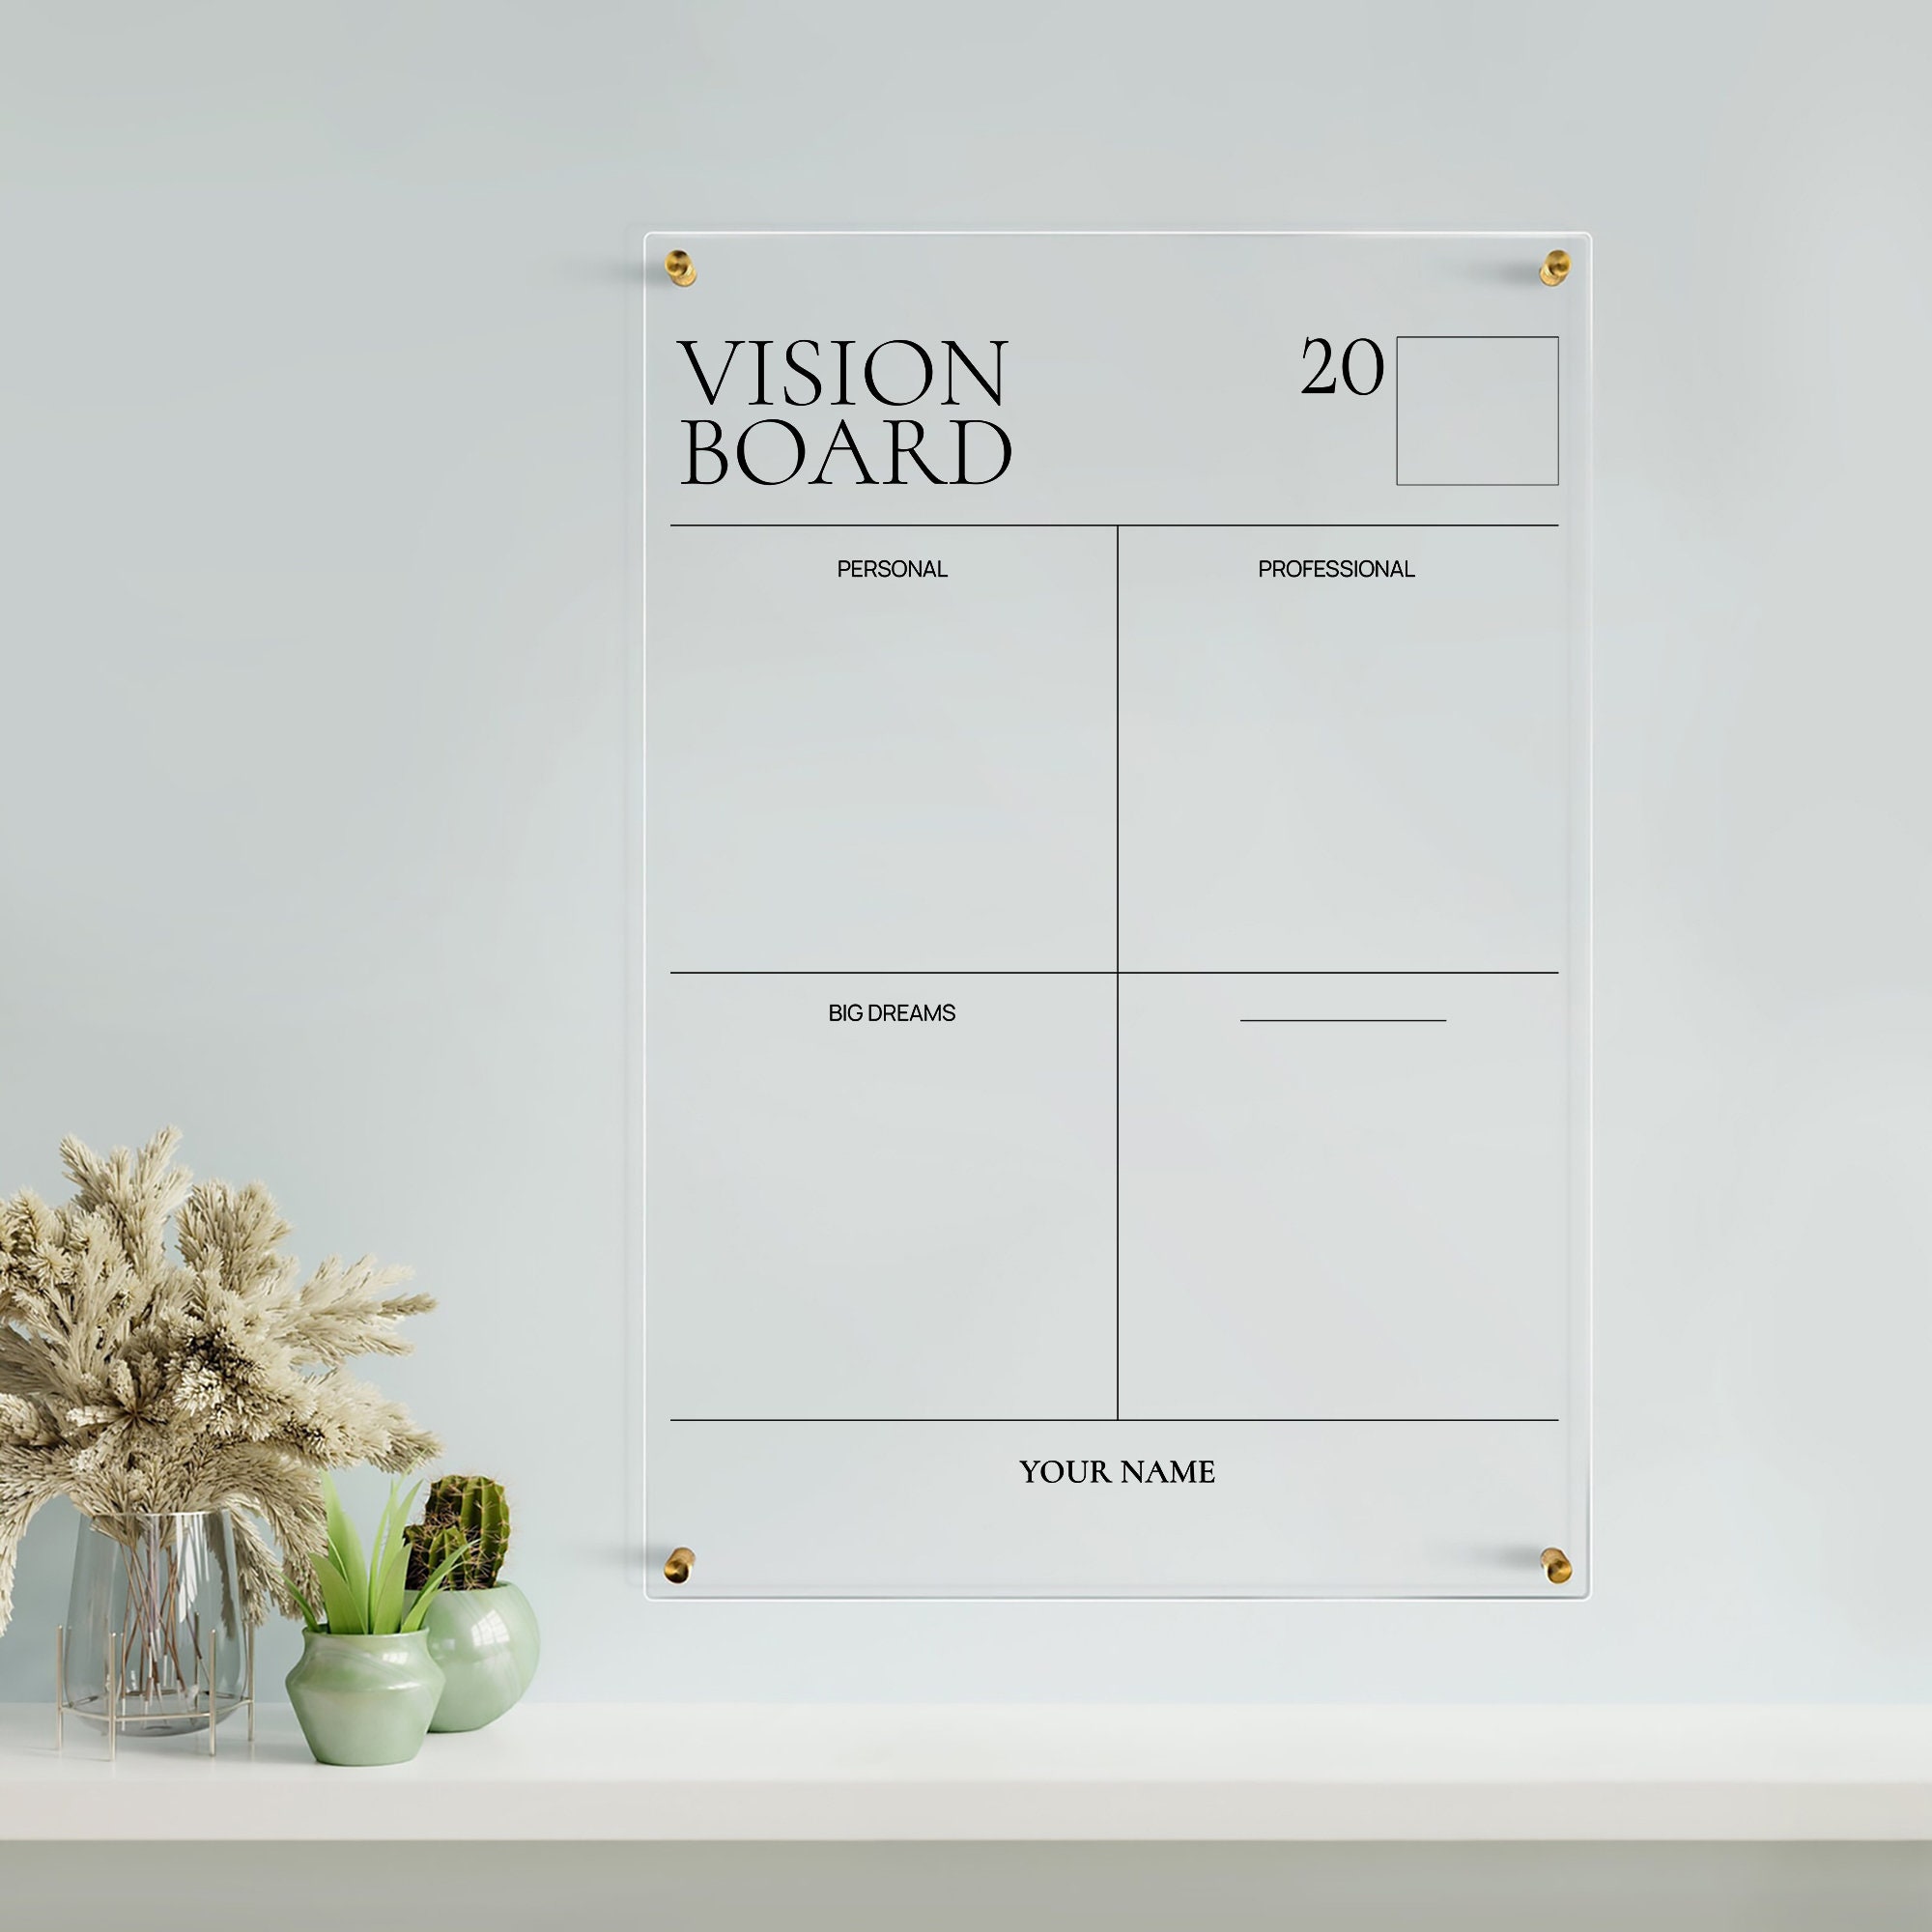 Vision Board Magnetic Whiteboard for Fridge 11x14 Dry Erase Vision Board Planner W/Watercolor Content Blocks - Use As Goals Board Fridge Planner